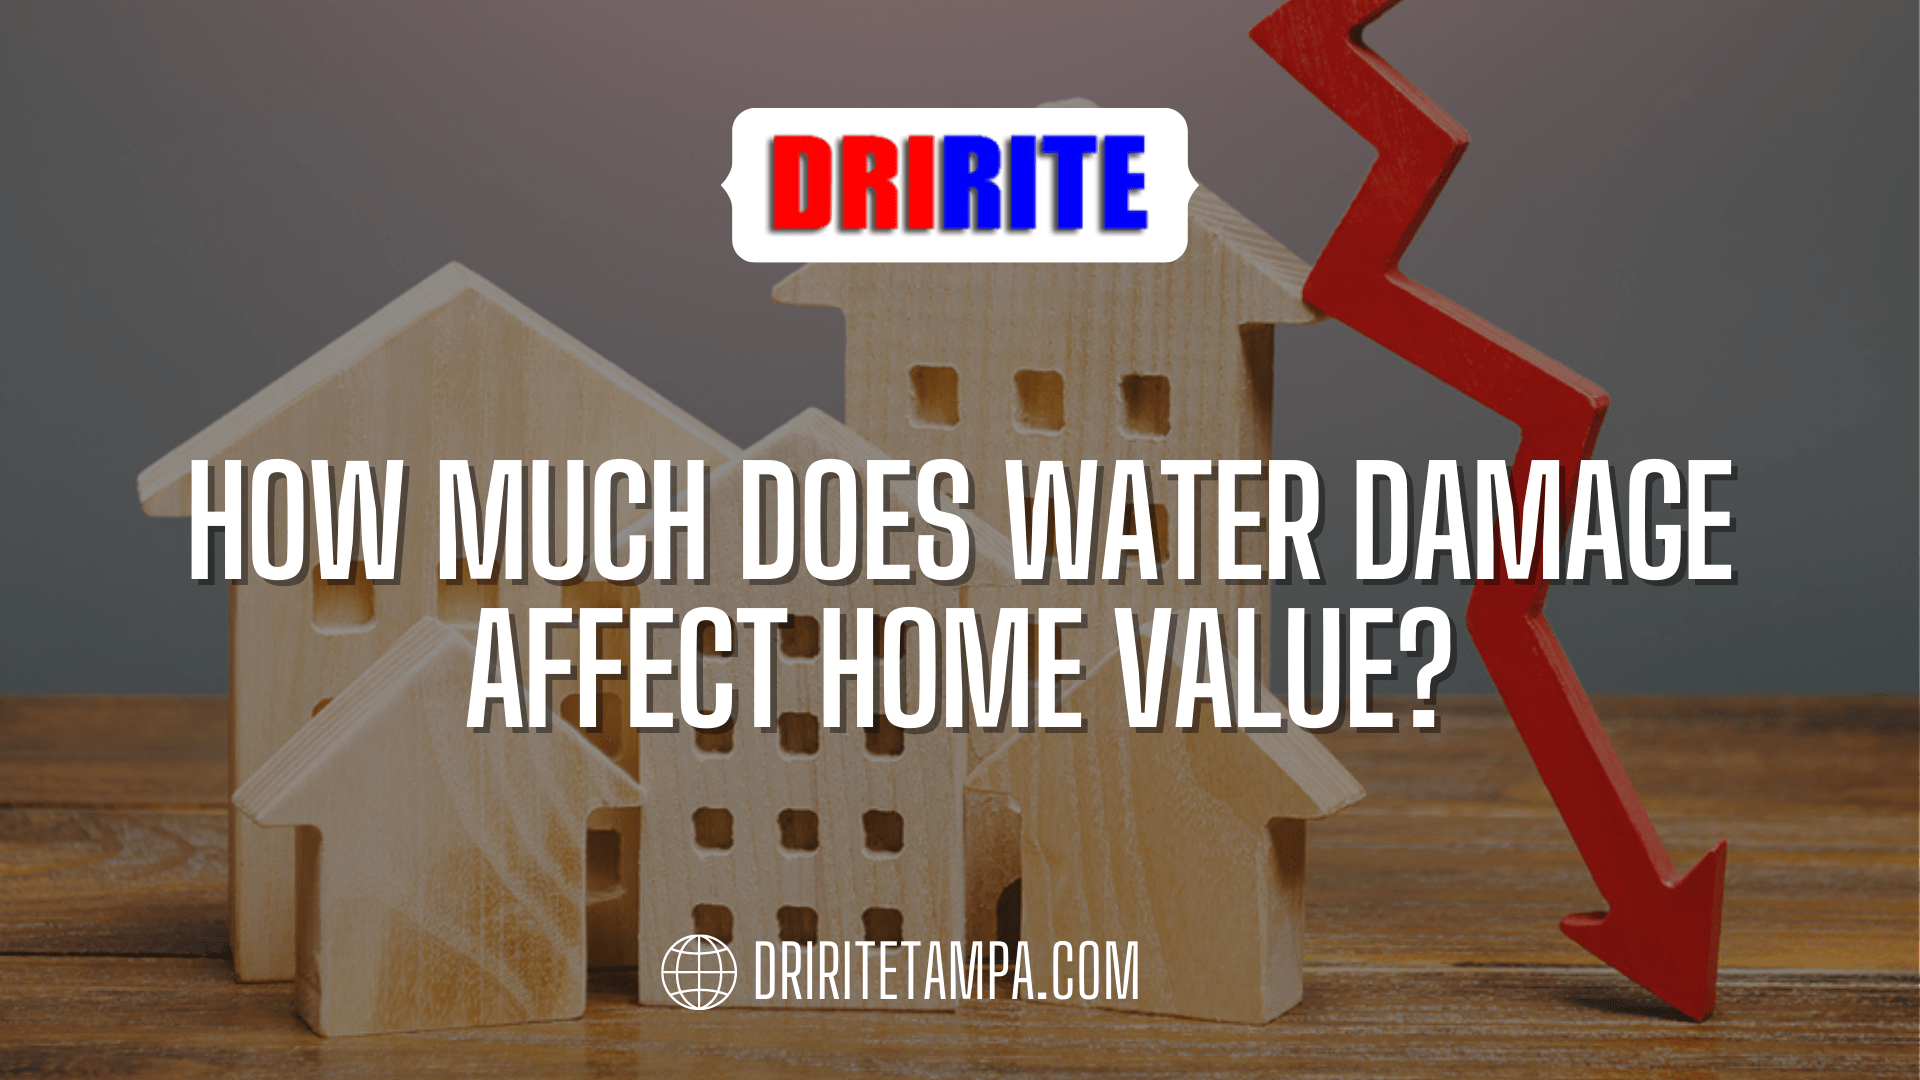 How Much Does Water Damage Affect Home Value